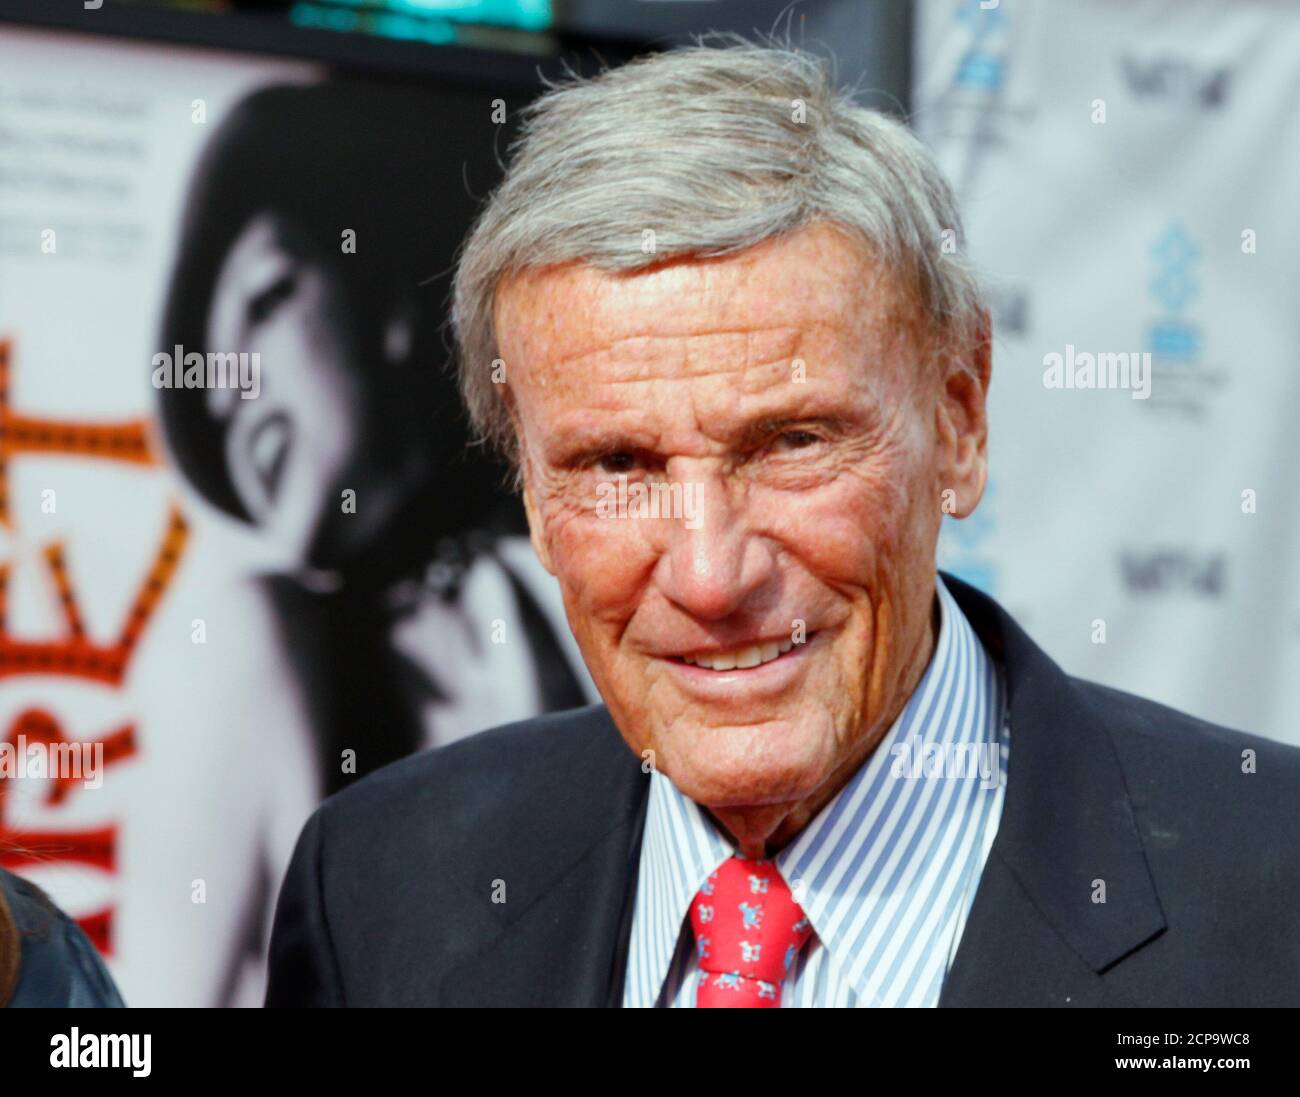 Actor Richard Anderson, best known for his roles in the TV series 'The Six Million Dollar Man' and 'The Bionic Woman' arrives at the world premiere of the 40th anniversary restoration of the film 'Cabaret' during the opening night gala of the 2012 TCM Classic Film Festival in Hollywood, California April 12, 2012. REUTERS/Fred Prouser (UNITED STATES - Tags: ENTERTAINMENT) Stock Photo